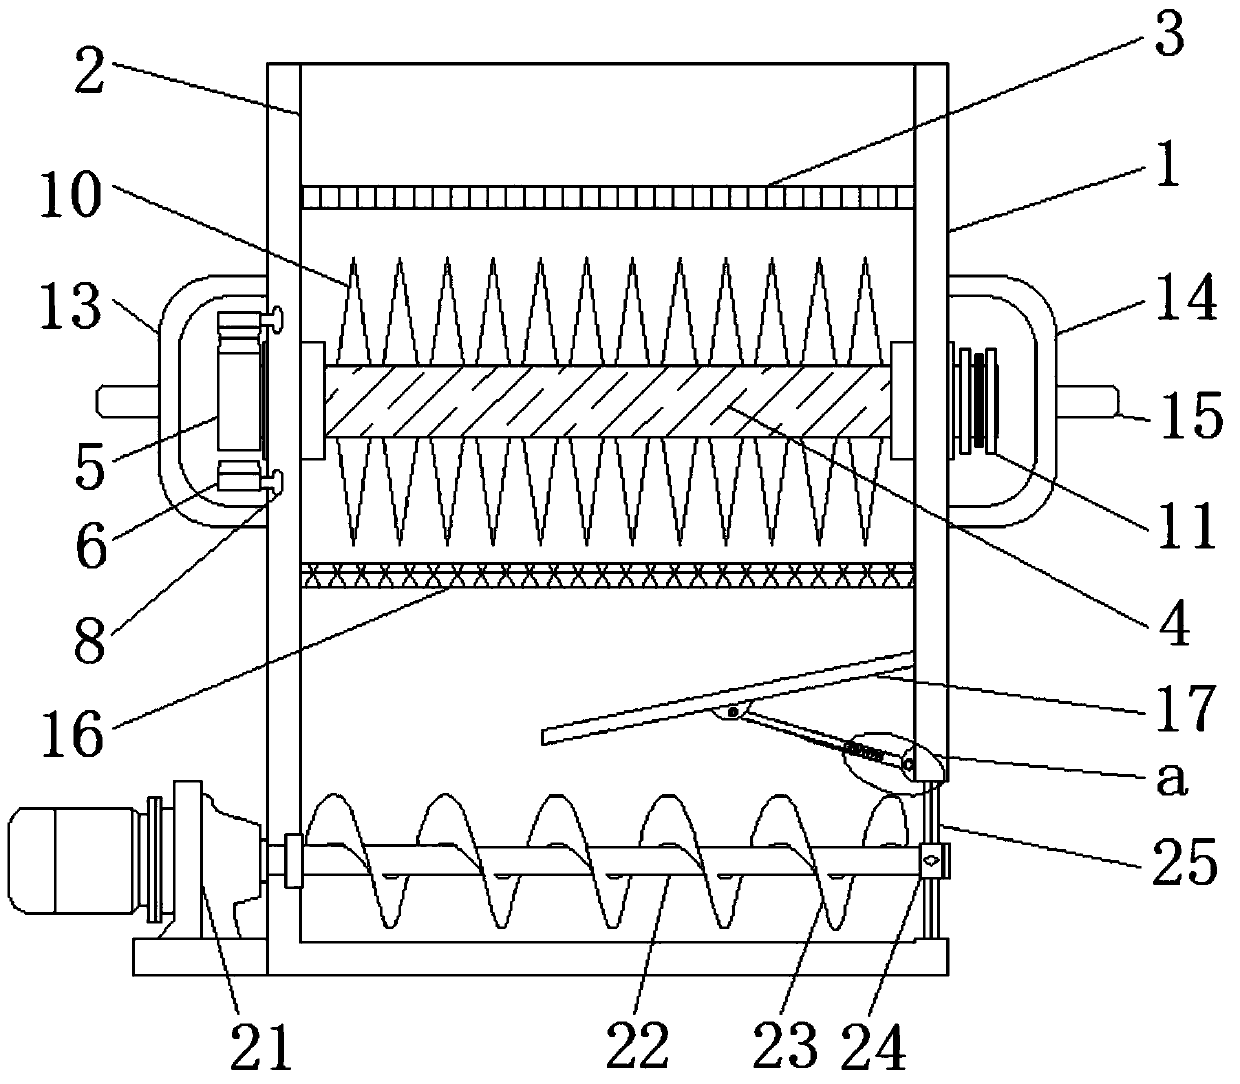 Aquatic feed crushing and mixing device convenient to discharge